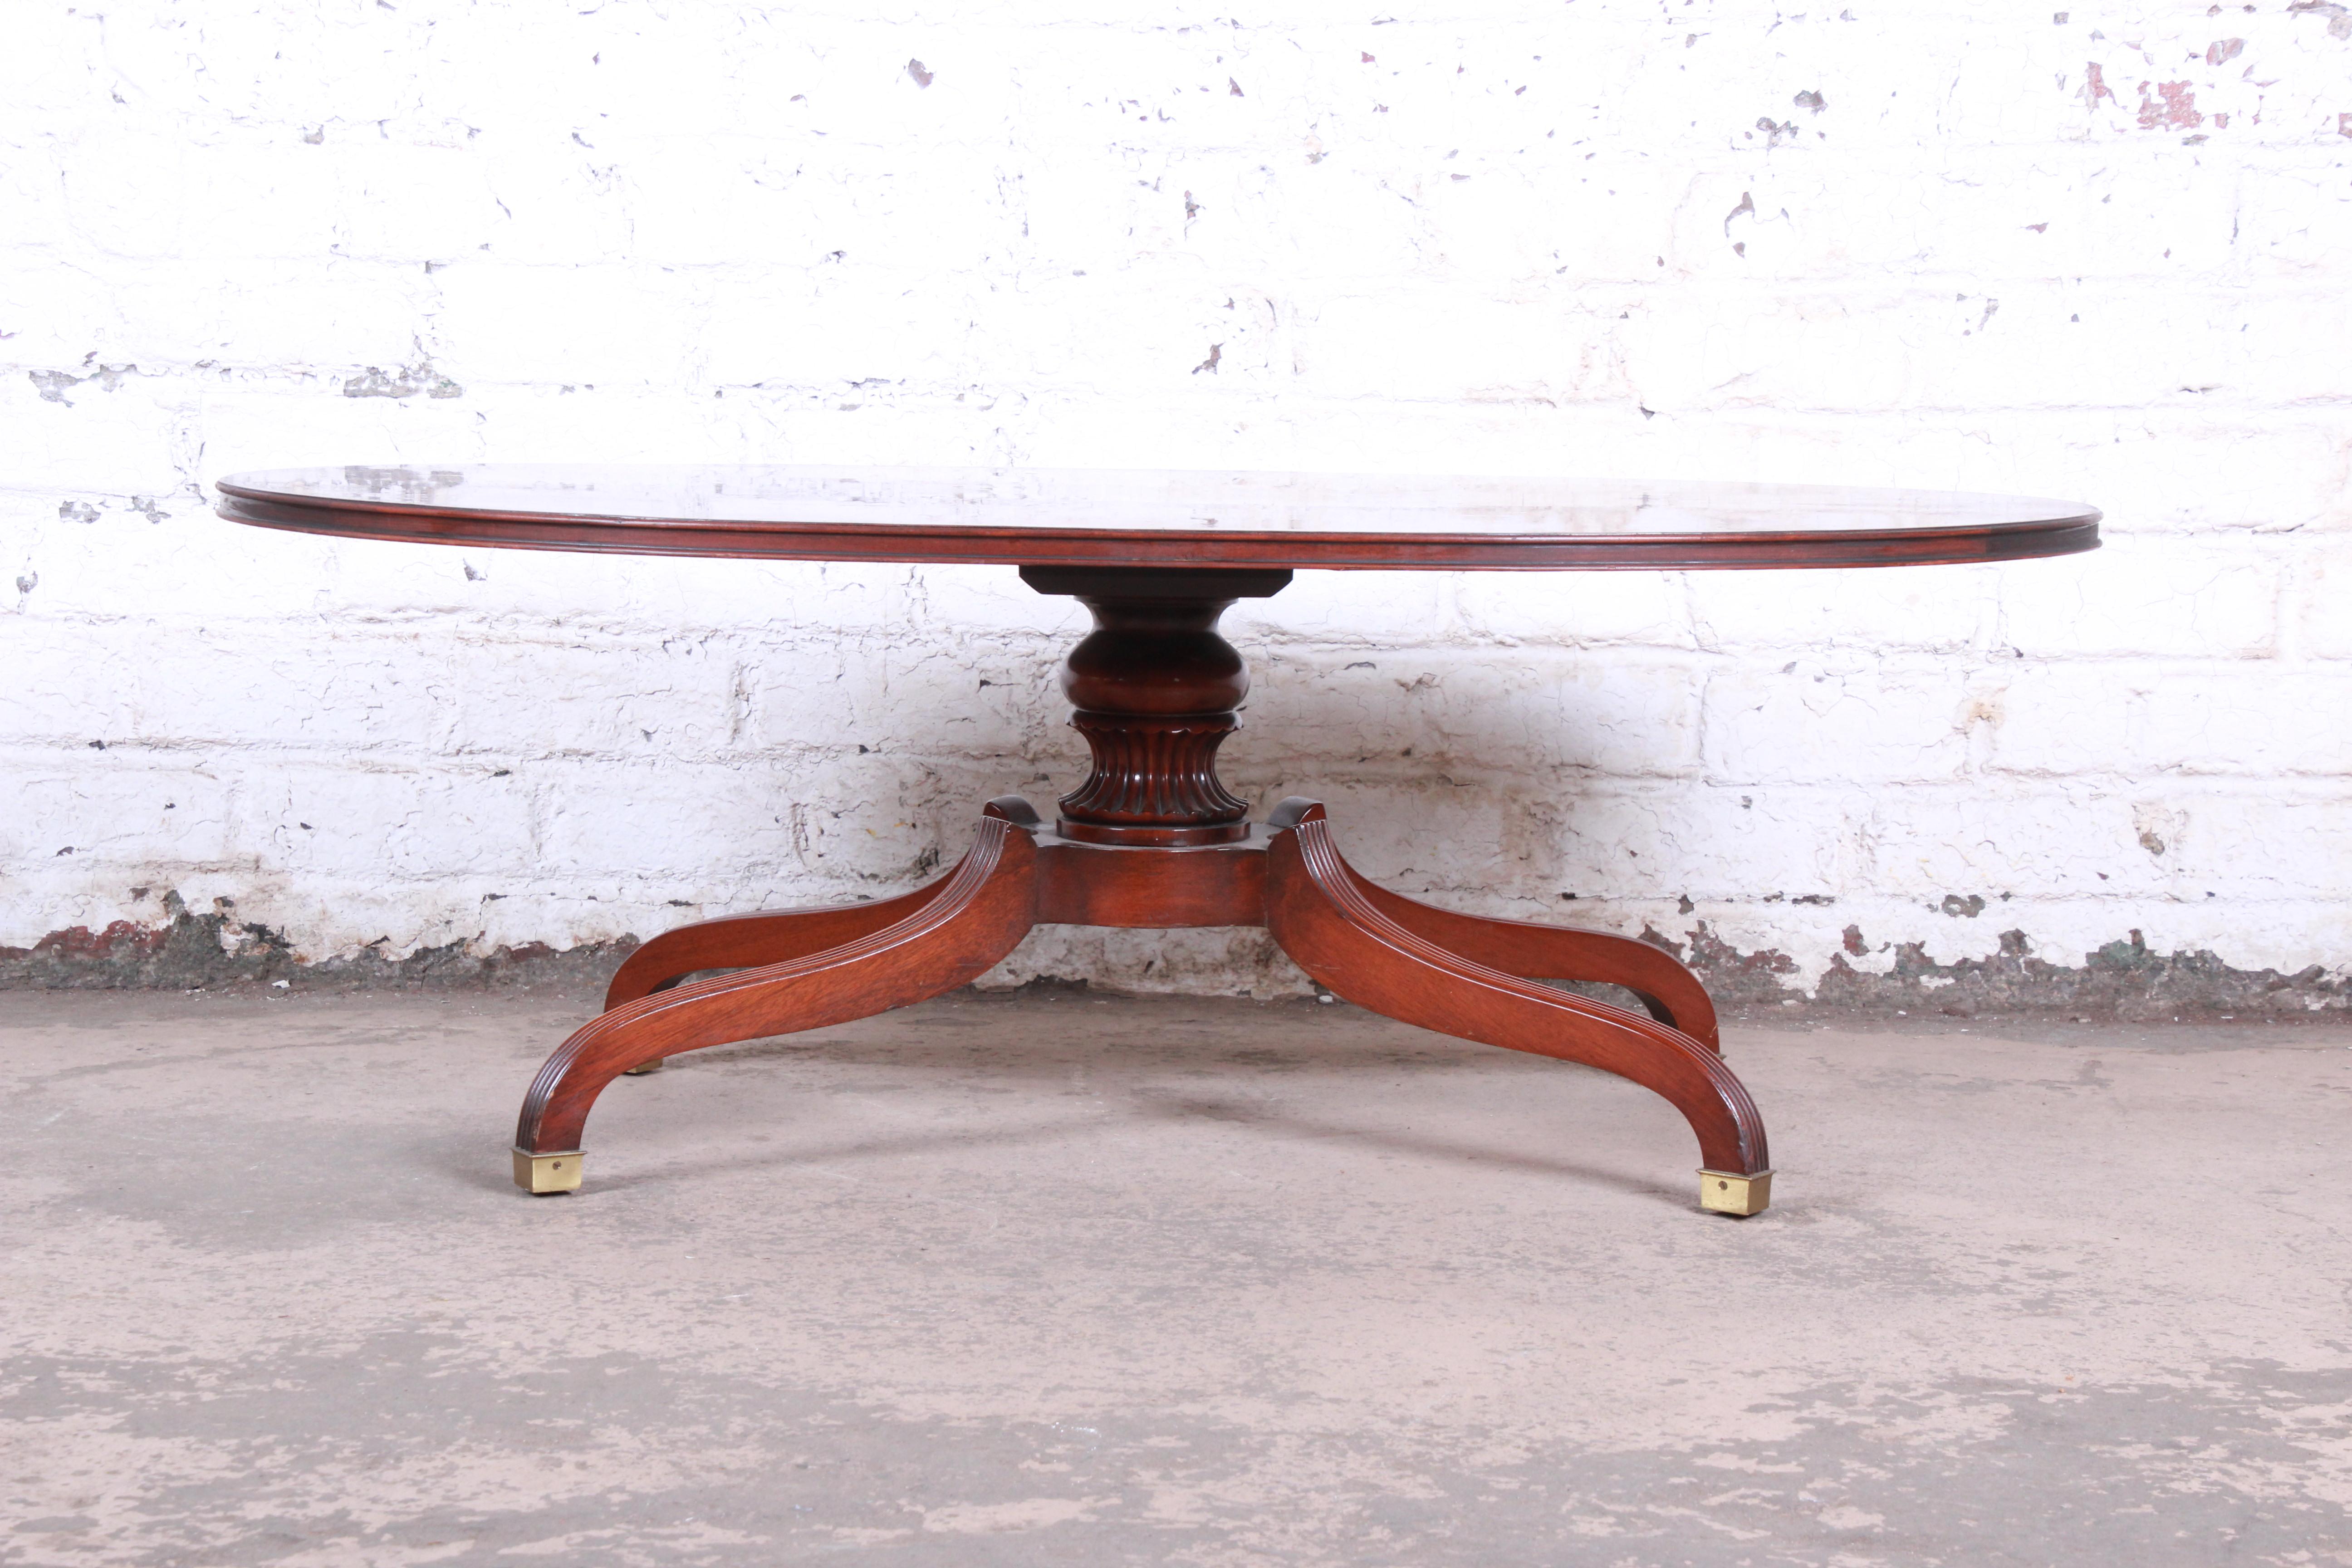 Flame mahogany Regency style coffee table

Made by Baker Furniture Company

USA, circa 1980s

Mahogany and brass

Measures: 50